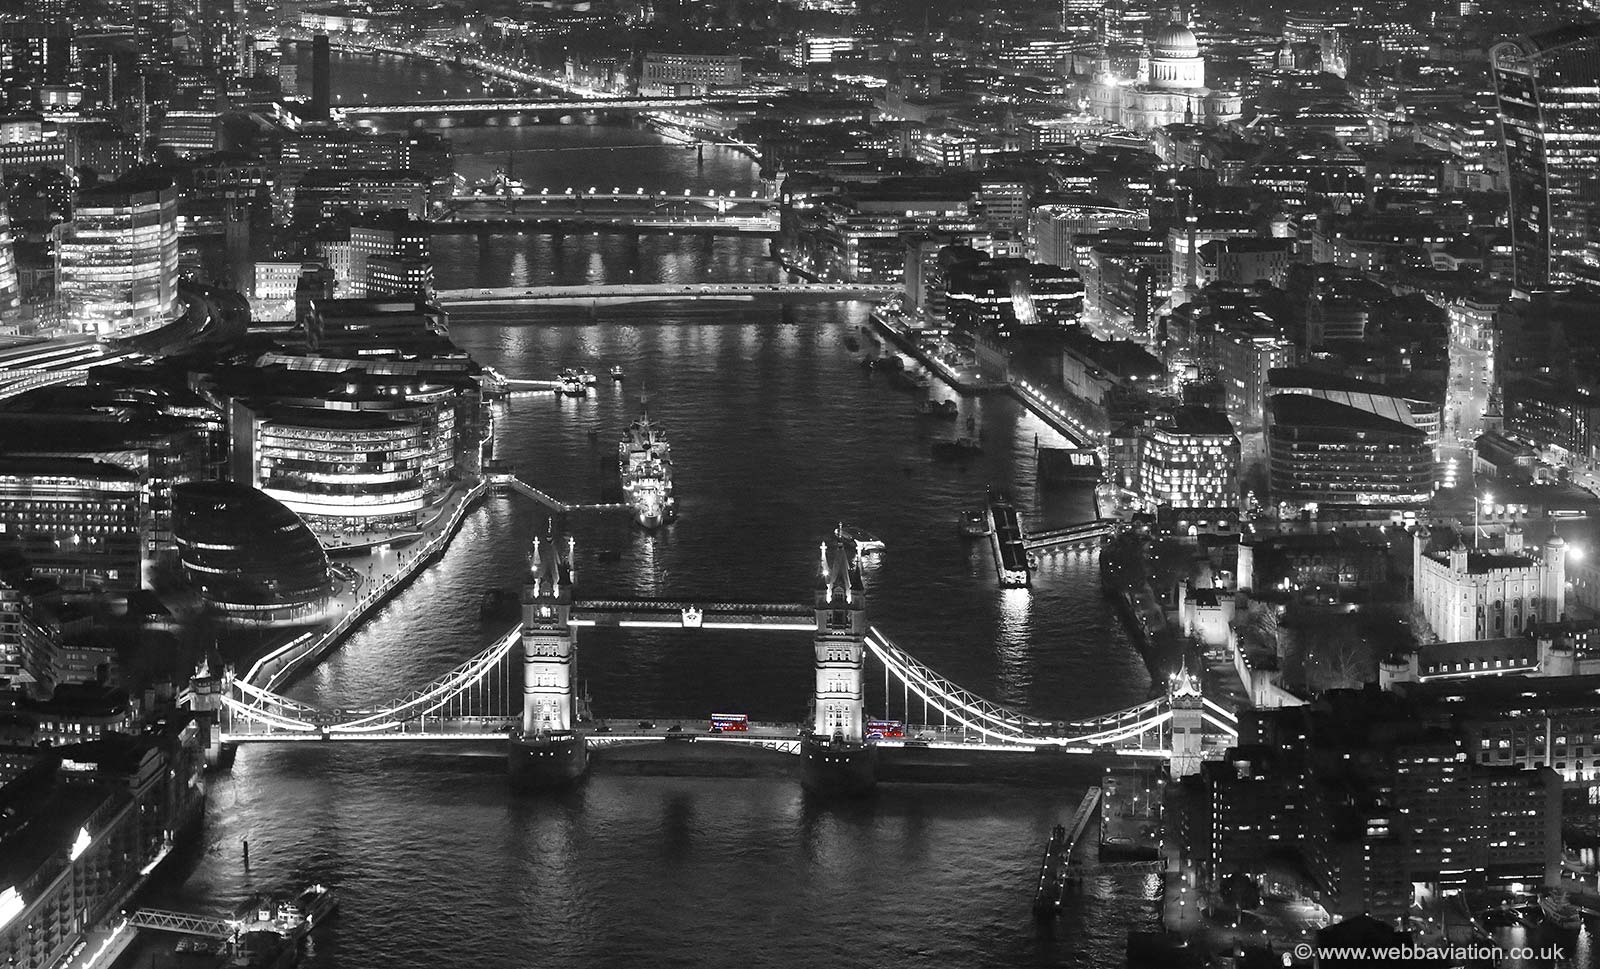 River Thames & Tower Bridge London at night  from the air